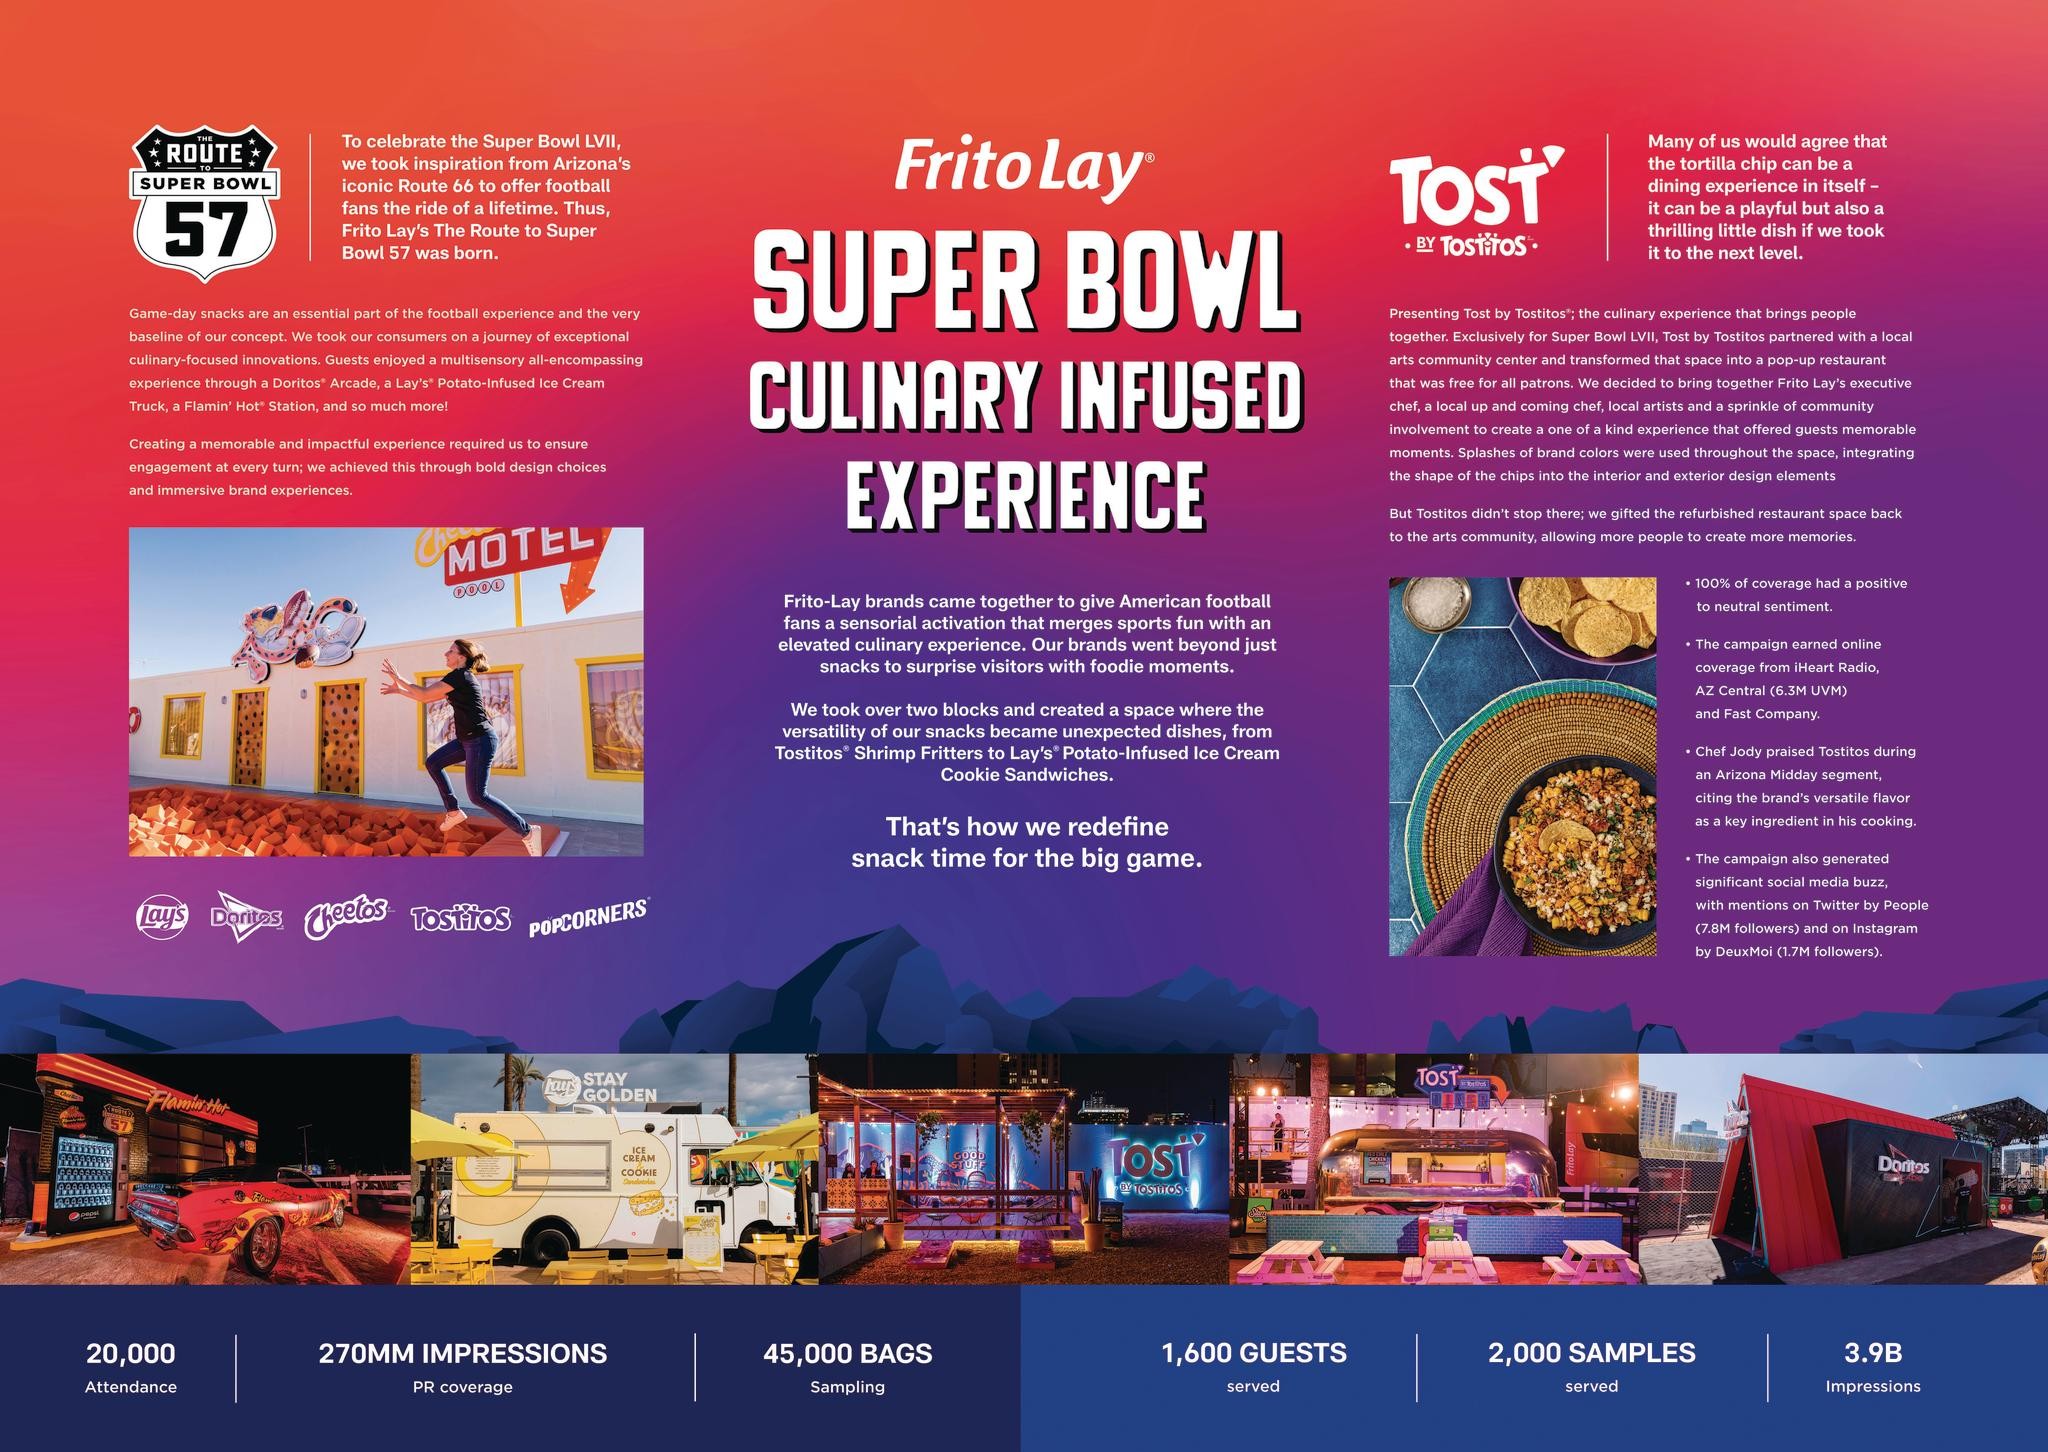 Frito-Lay Superbowl Culinary Infused Experience